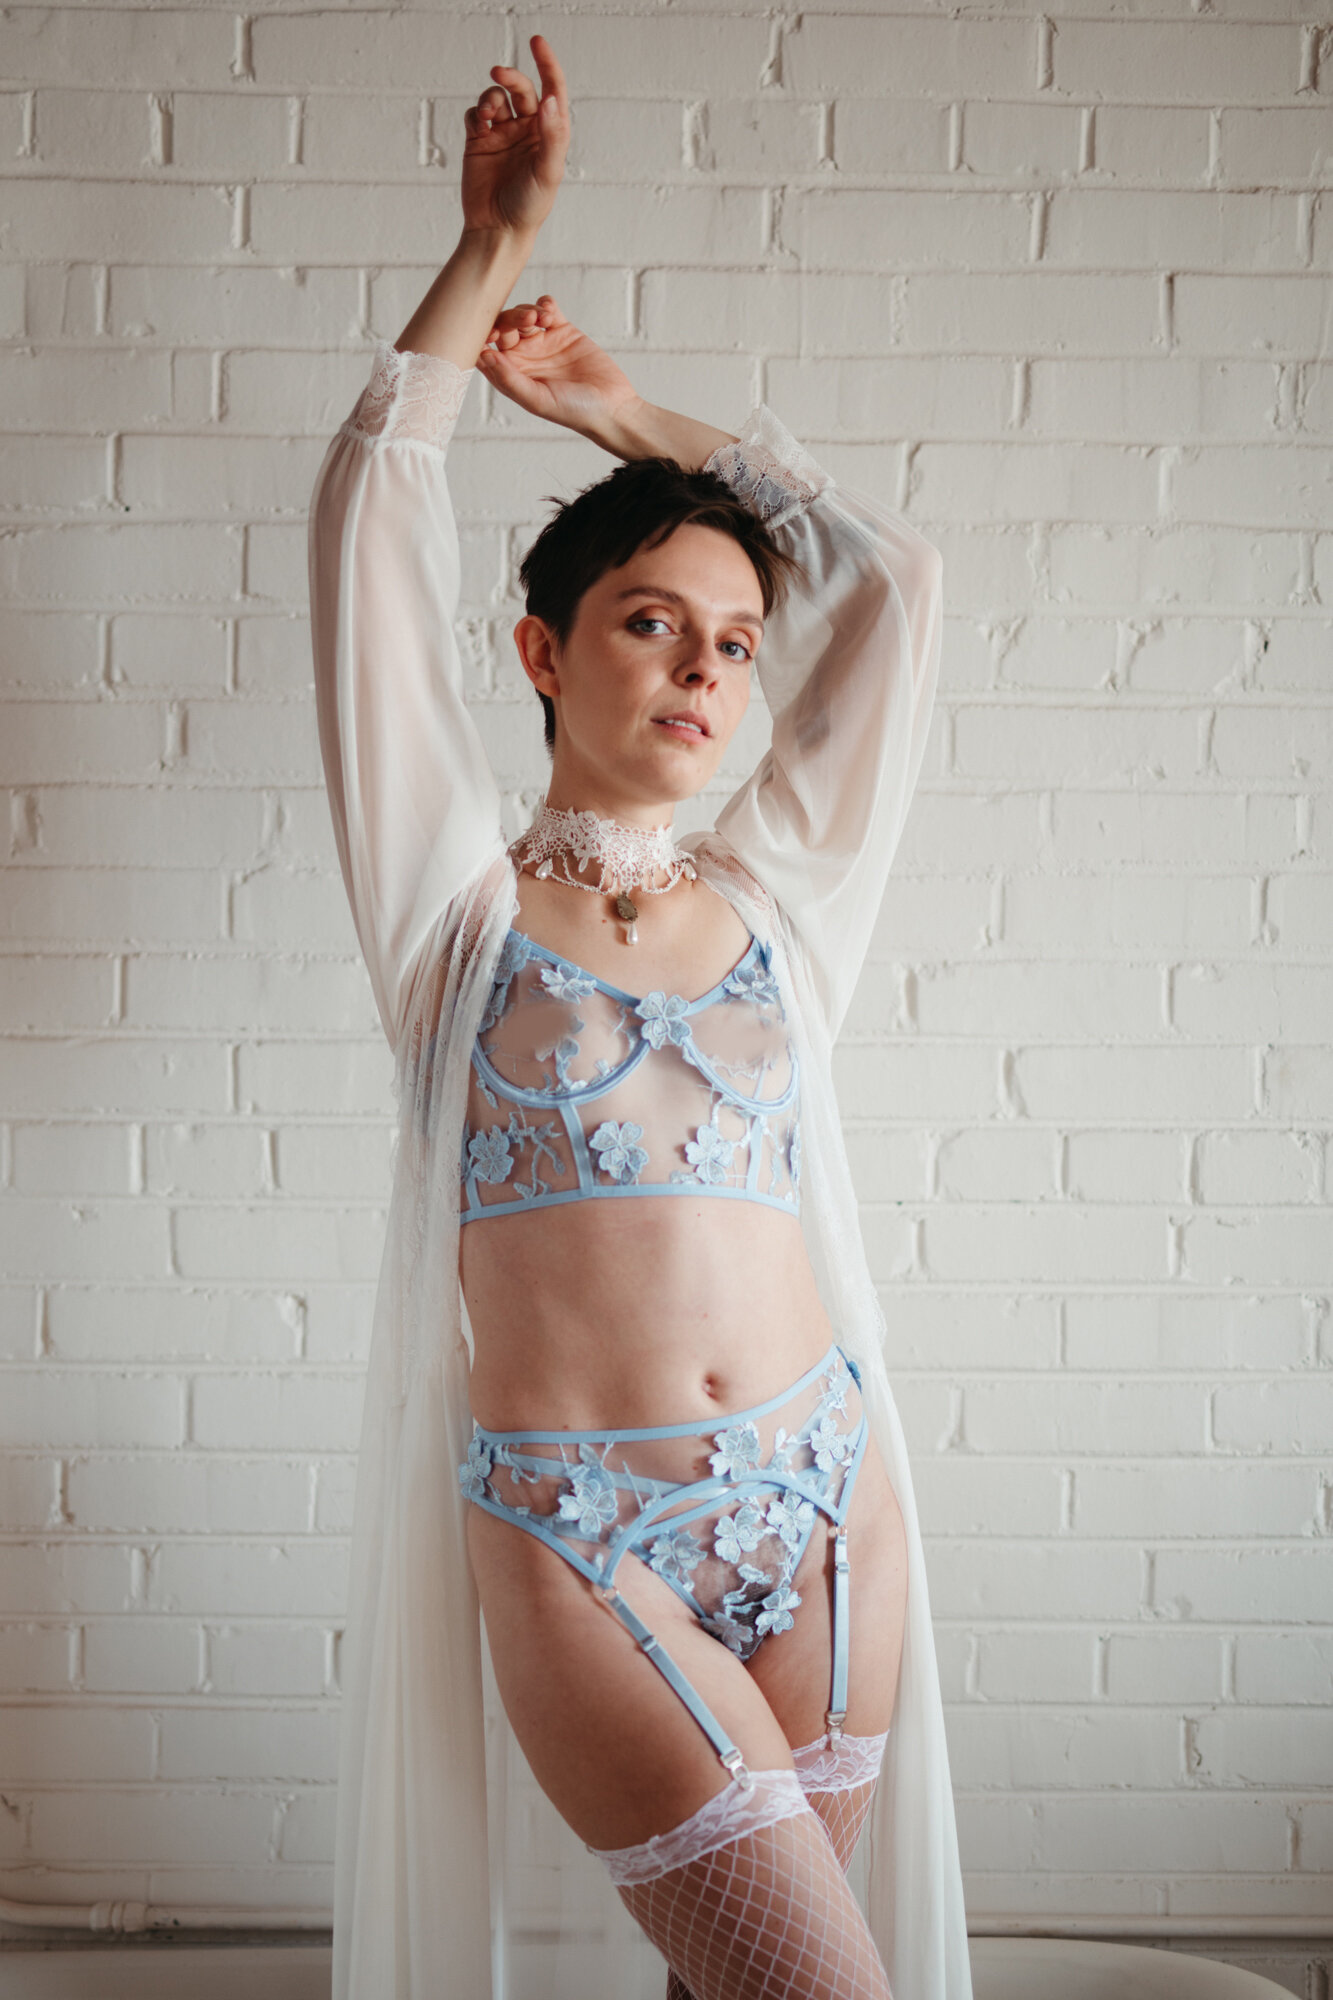 Genderqueer person wearing victorian style blue lingerie and a white robe reaching upwards